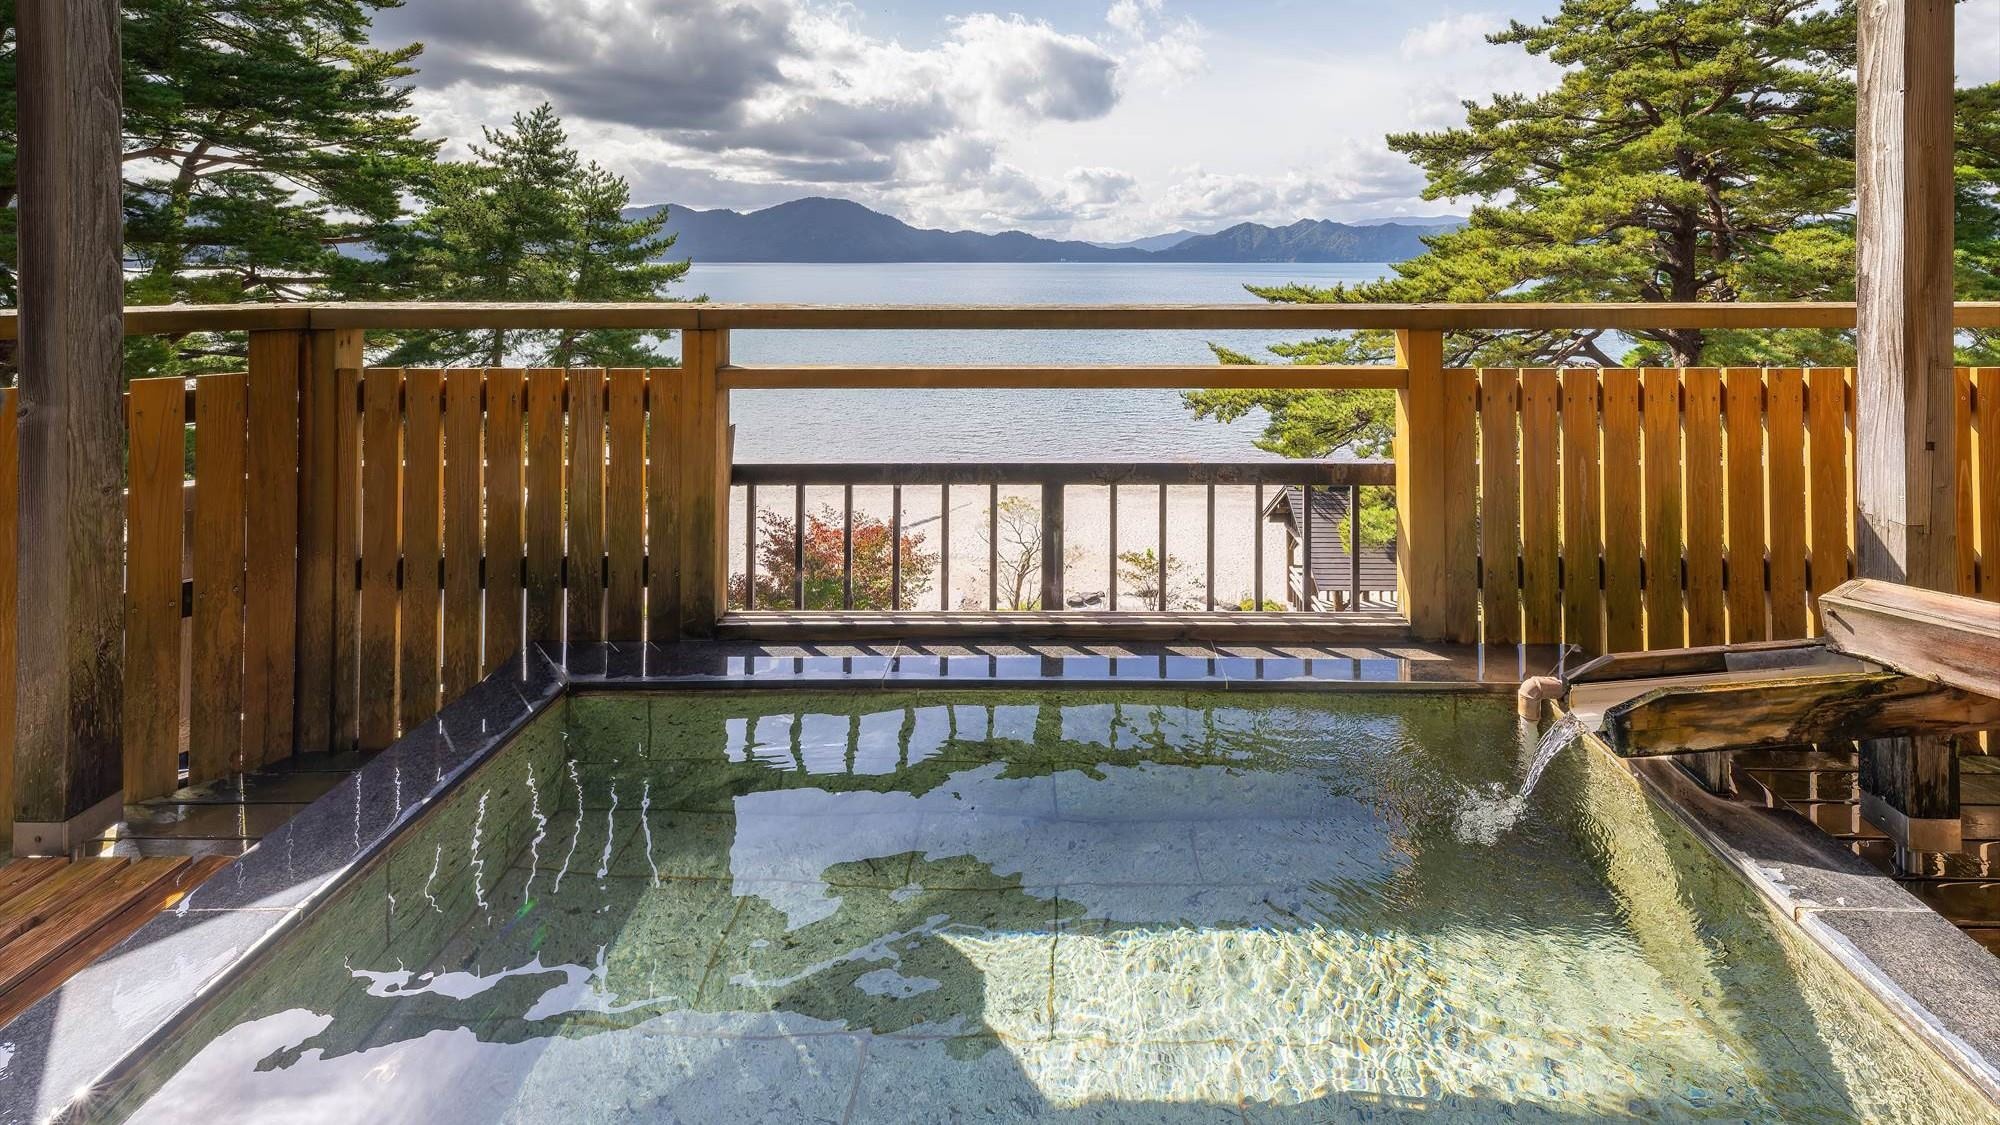 ■Free private open-air bath with a view | A spectacular open-air bath where you can see Lake Tazawa sparkling in lapis lazuli and the majestic mountains of Akita right in front of you.